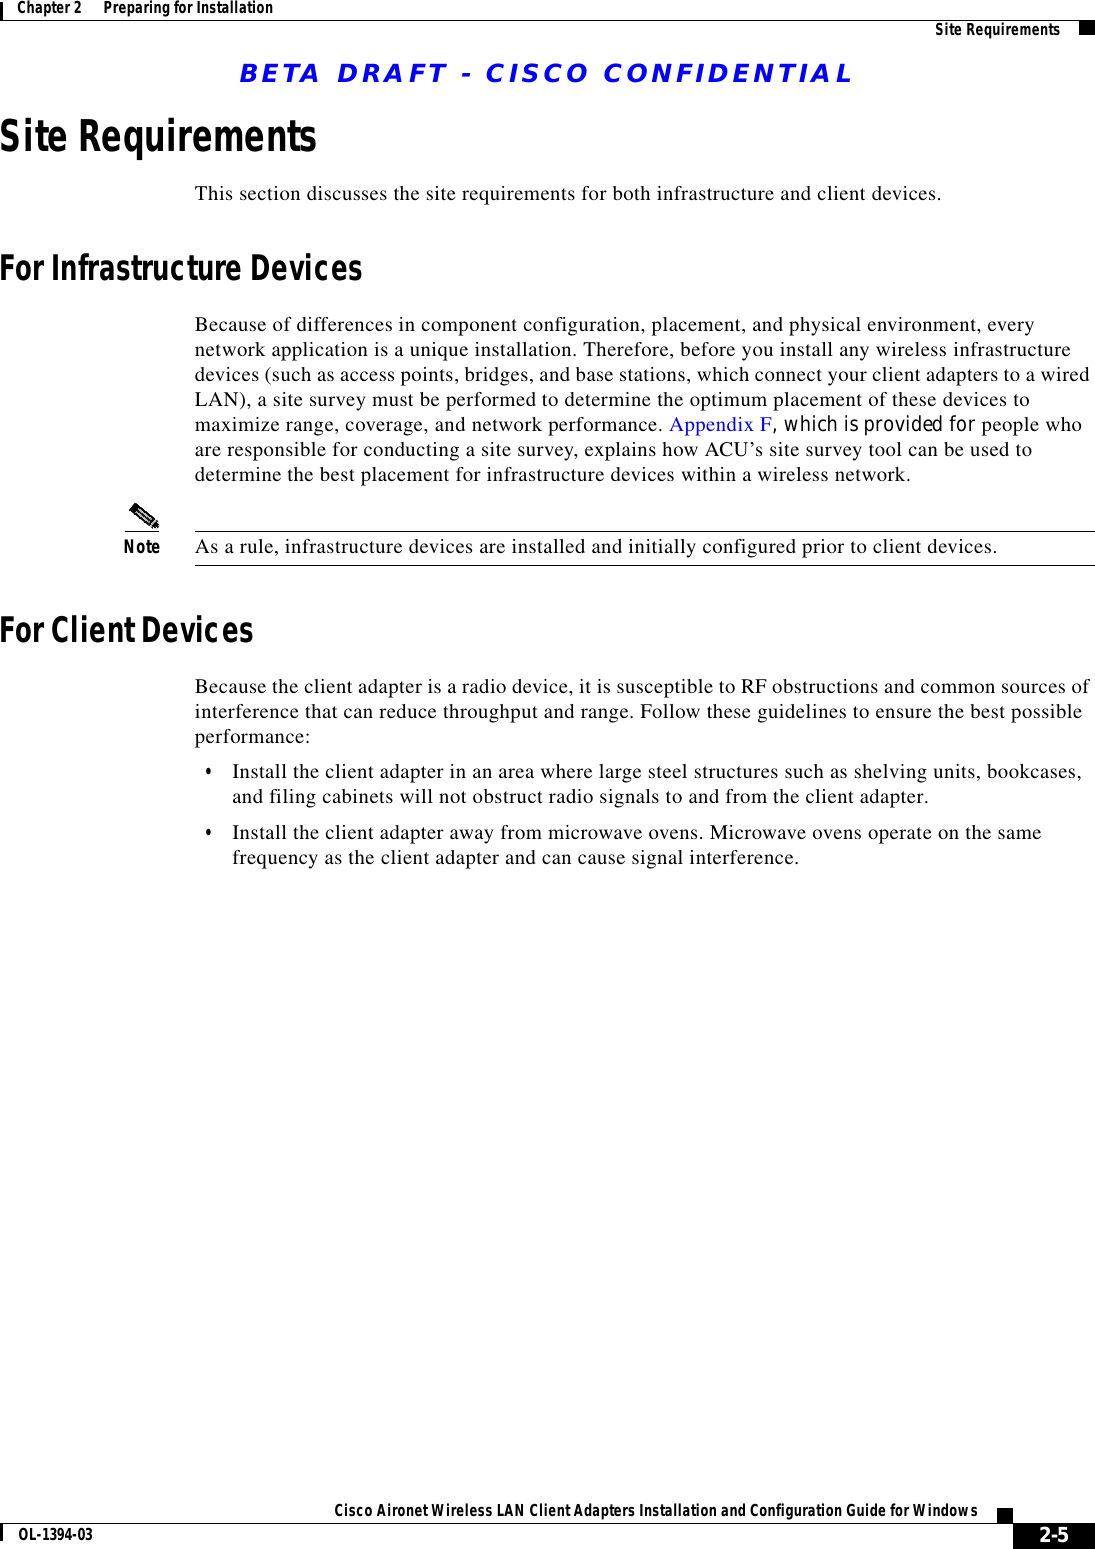 BETA DRAFT - CISCO CONFIDENTIAL2-5Cisco Aironet Wireless LAN Client Adapters Installation and Configuration Guide for WindowsOL-1394-03Chapter 2      Preparing for Installation Site RequirementsSite RequirementsThis section discusses the site requirements for both infrastructure and client devices.For Infrastructure DevicesBecause of differences in component configuration, placement, and physical environment, every network application is a unique installation. Therefore, before you install any wireless infrastructure devices (such as access points, bridges, and base stations, which connect your client adapters to a wired LAN), a site survey must be performed to determine the optimum placement of these devices to maximize range, coverage, and network performance. Appendix F, which is provided for people who are responsible for conducting a site survey, explains how ACU’s site survey tool can be used to determine the best placement for infrastructure devices within a wireless network.Note As a rule, infrastructure devices are installed and initially configured prior to client devices.For Client DevicesBecause the client adapter is a radio device, it is susceptible to RF obstructions and common sources of interference that can reduce throughput and range. Follow these guidelines to ensure the best possible performance:•Install the client adapter in an area where large steel structures such as shelving units, bookcases, and filing cabinets will not obstruct radio signals to and from the client adapter.•Install the client adapter away from microwave ovens. Microwave ovens operate on the same frequency as the client adapter and can cause signal interference.